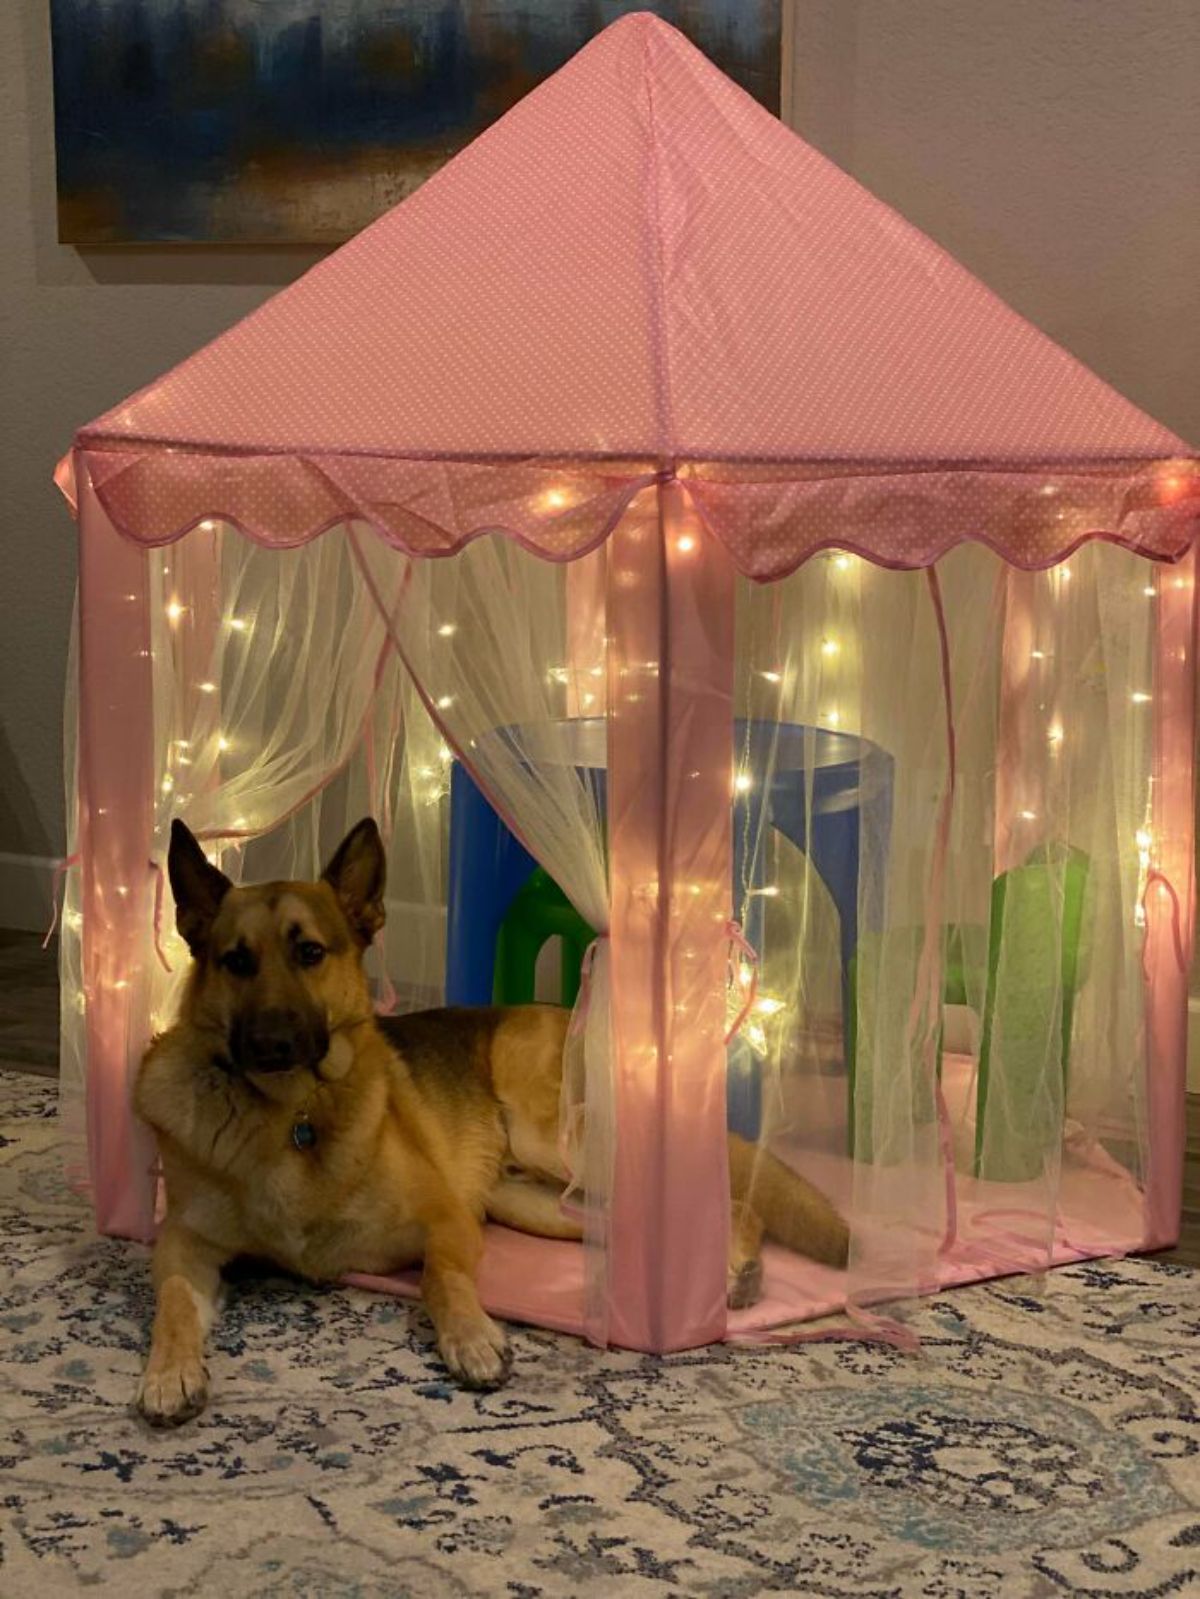 german shepherd laying in a pink princess tent with fairy lights